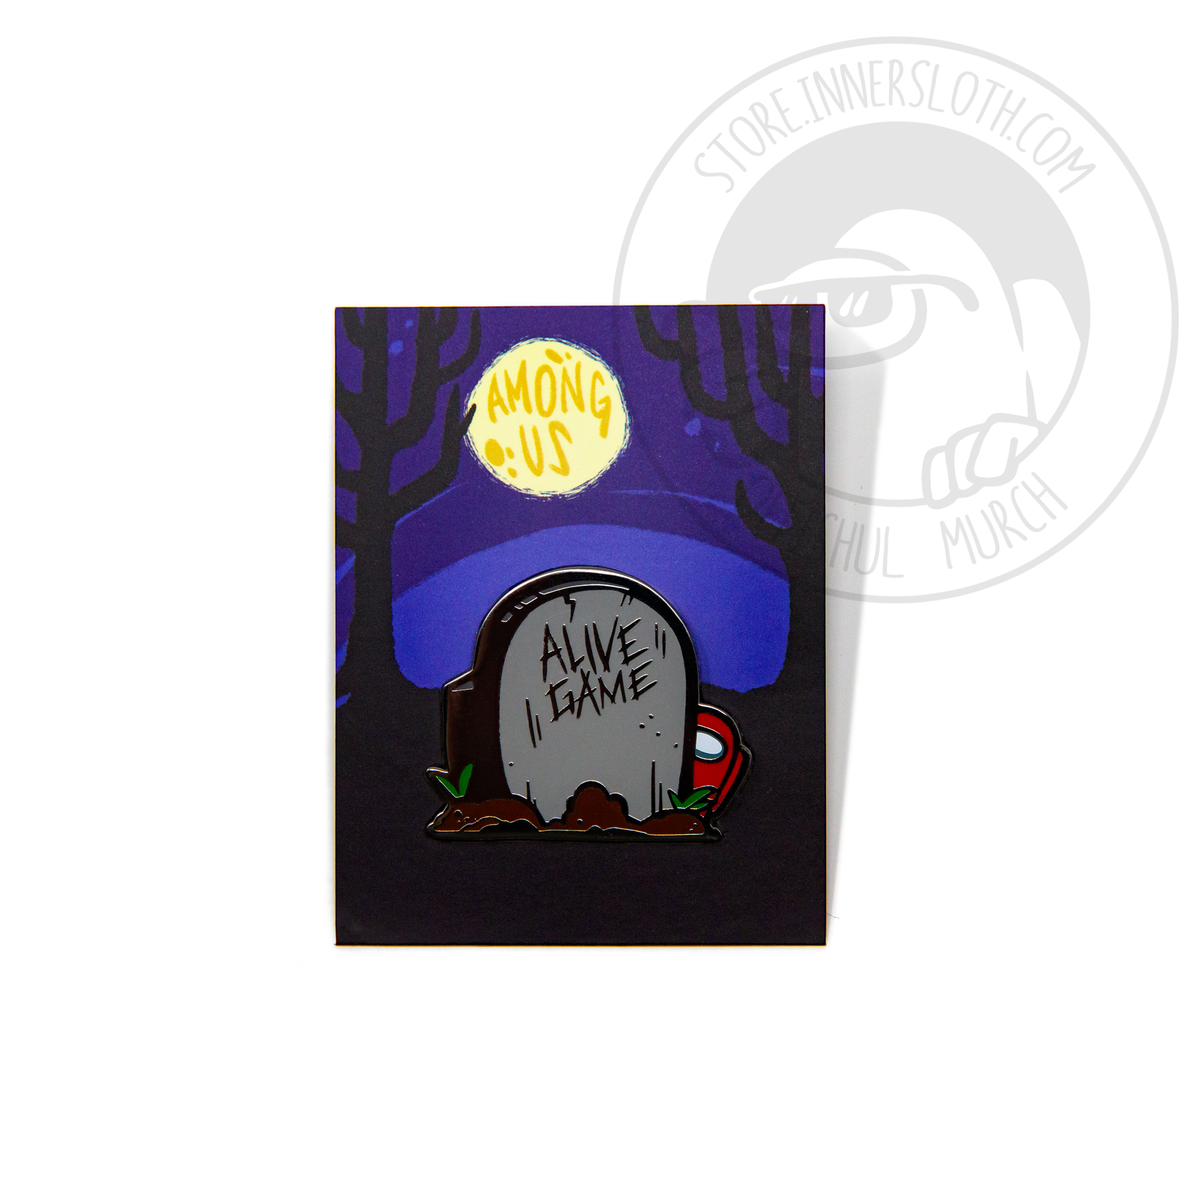 A product photo of the Among Us: Dead Game Pin on its backing card. The illustration around the pin shows spooky woods, and a full yellow moon that reads “AMONG US.”